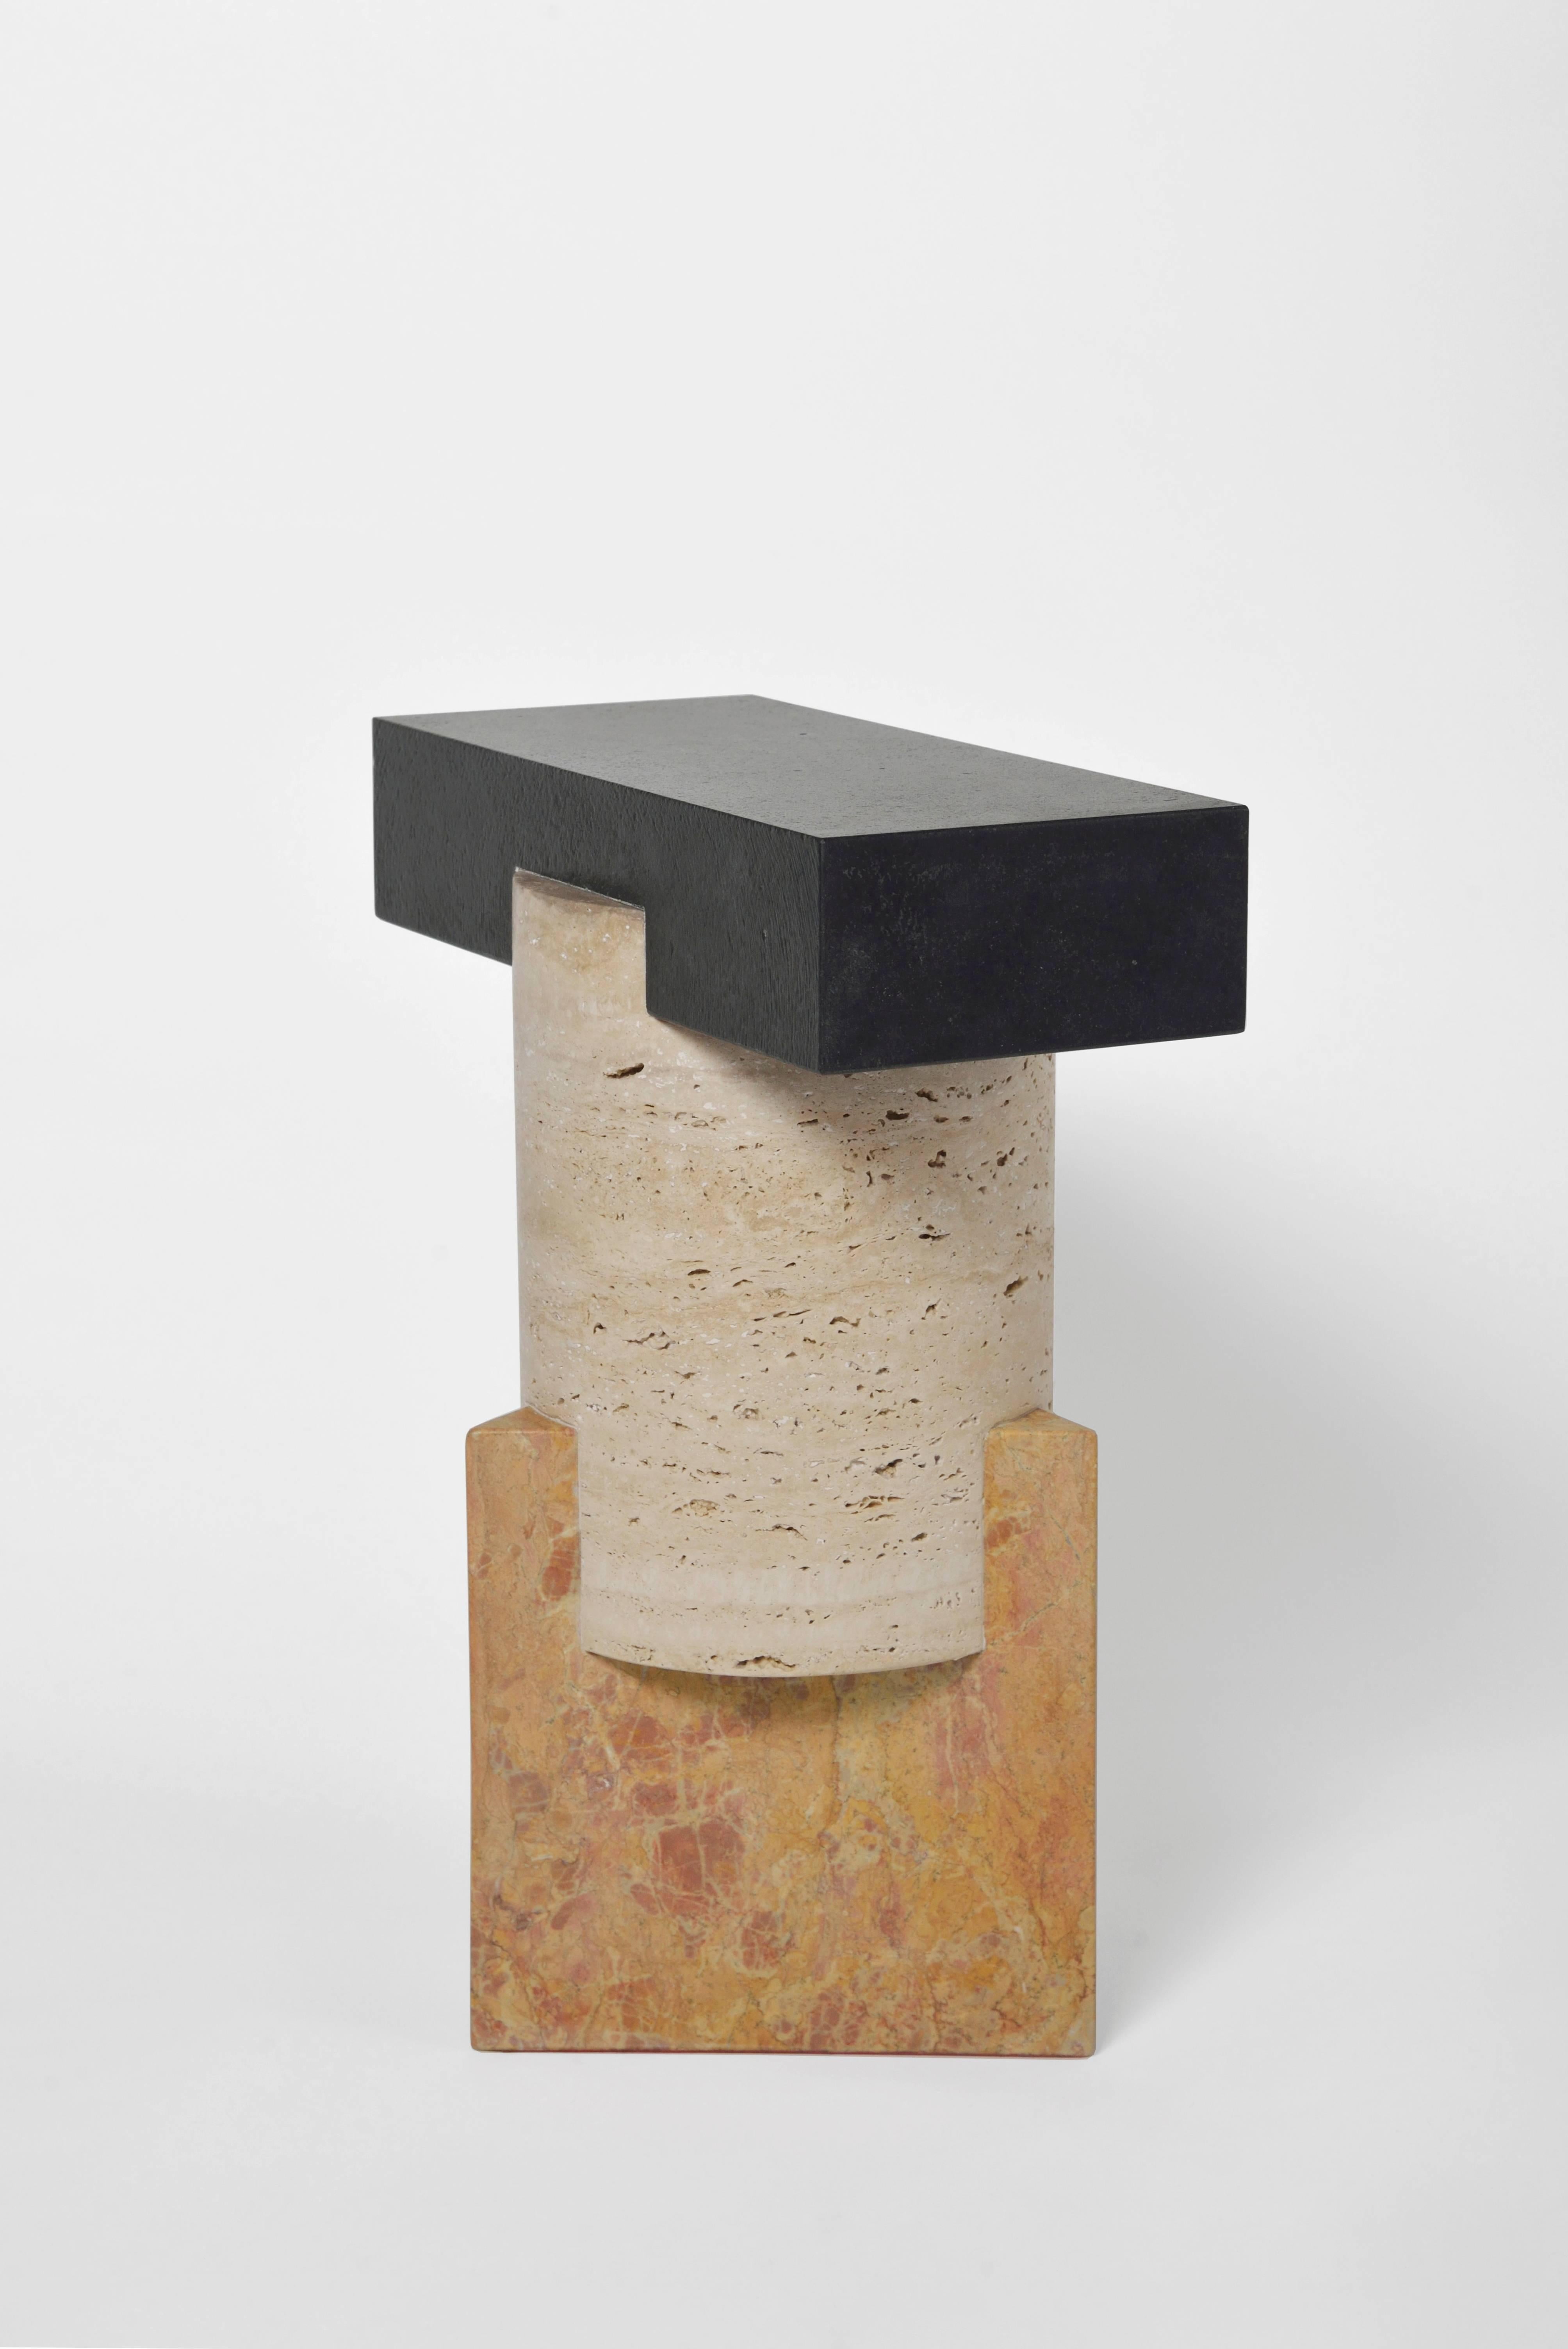 Kapital is a series of limited edition tables and stools based on essential forms, reminiscent of primordial stone capitals and simple geometric assemblages commonly found in classical architecture. The distinct and characteristic profiles,